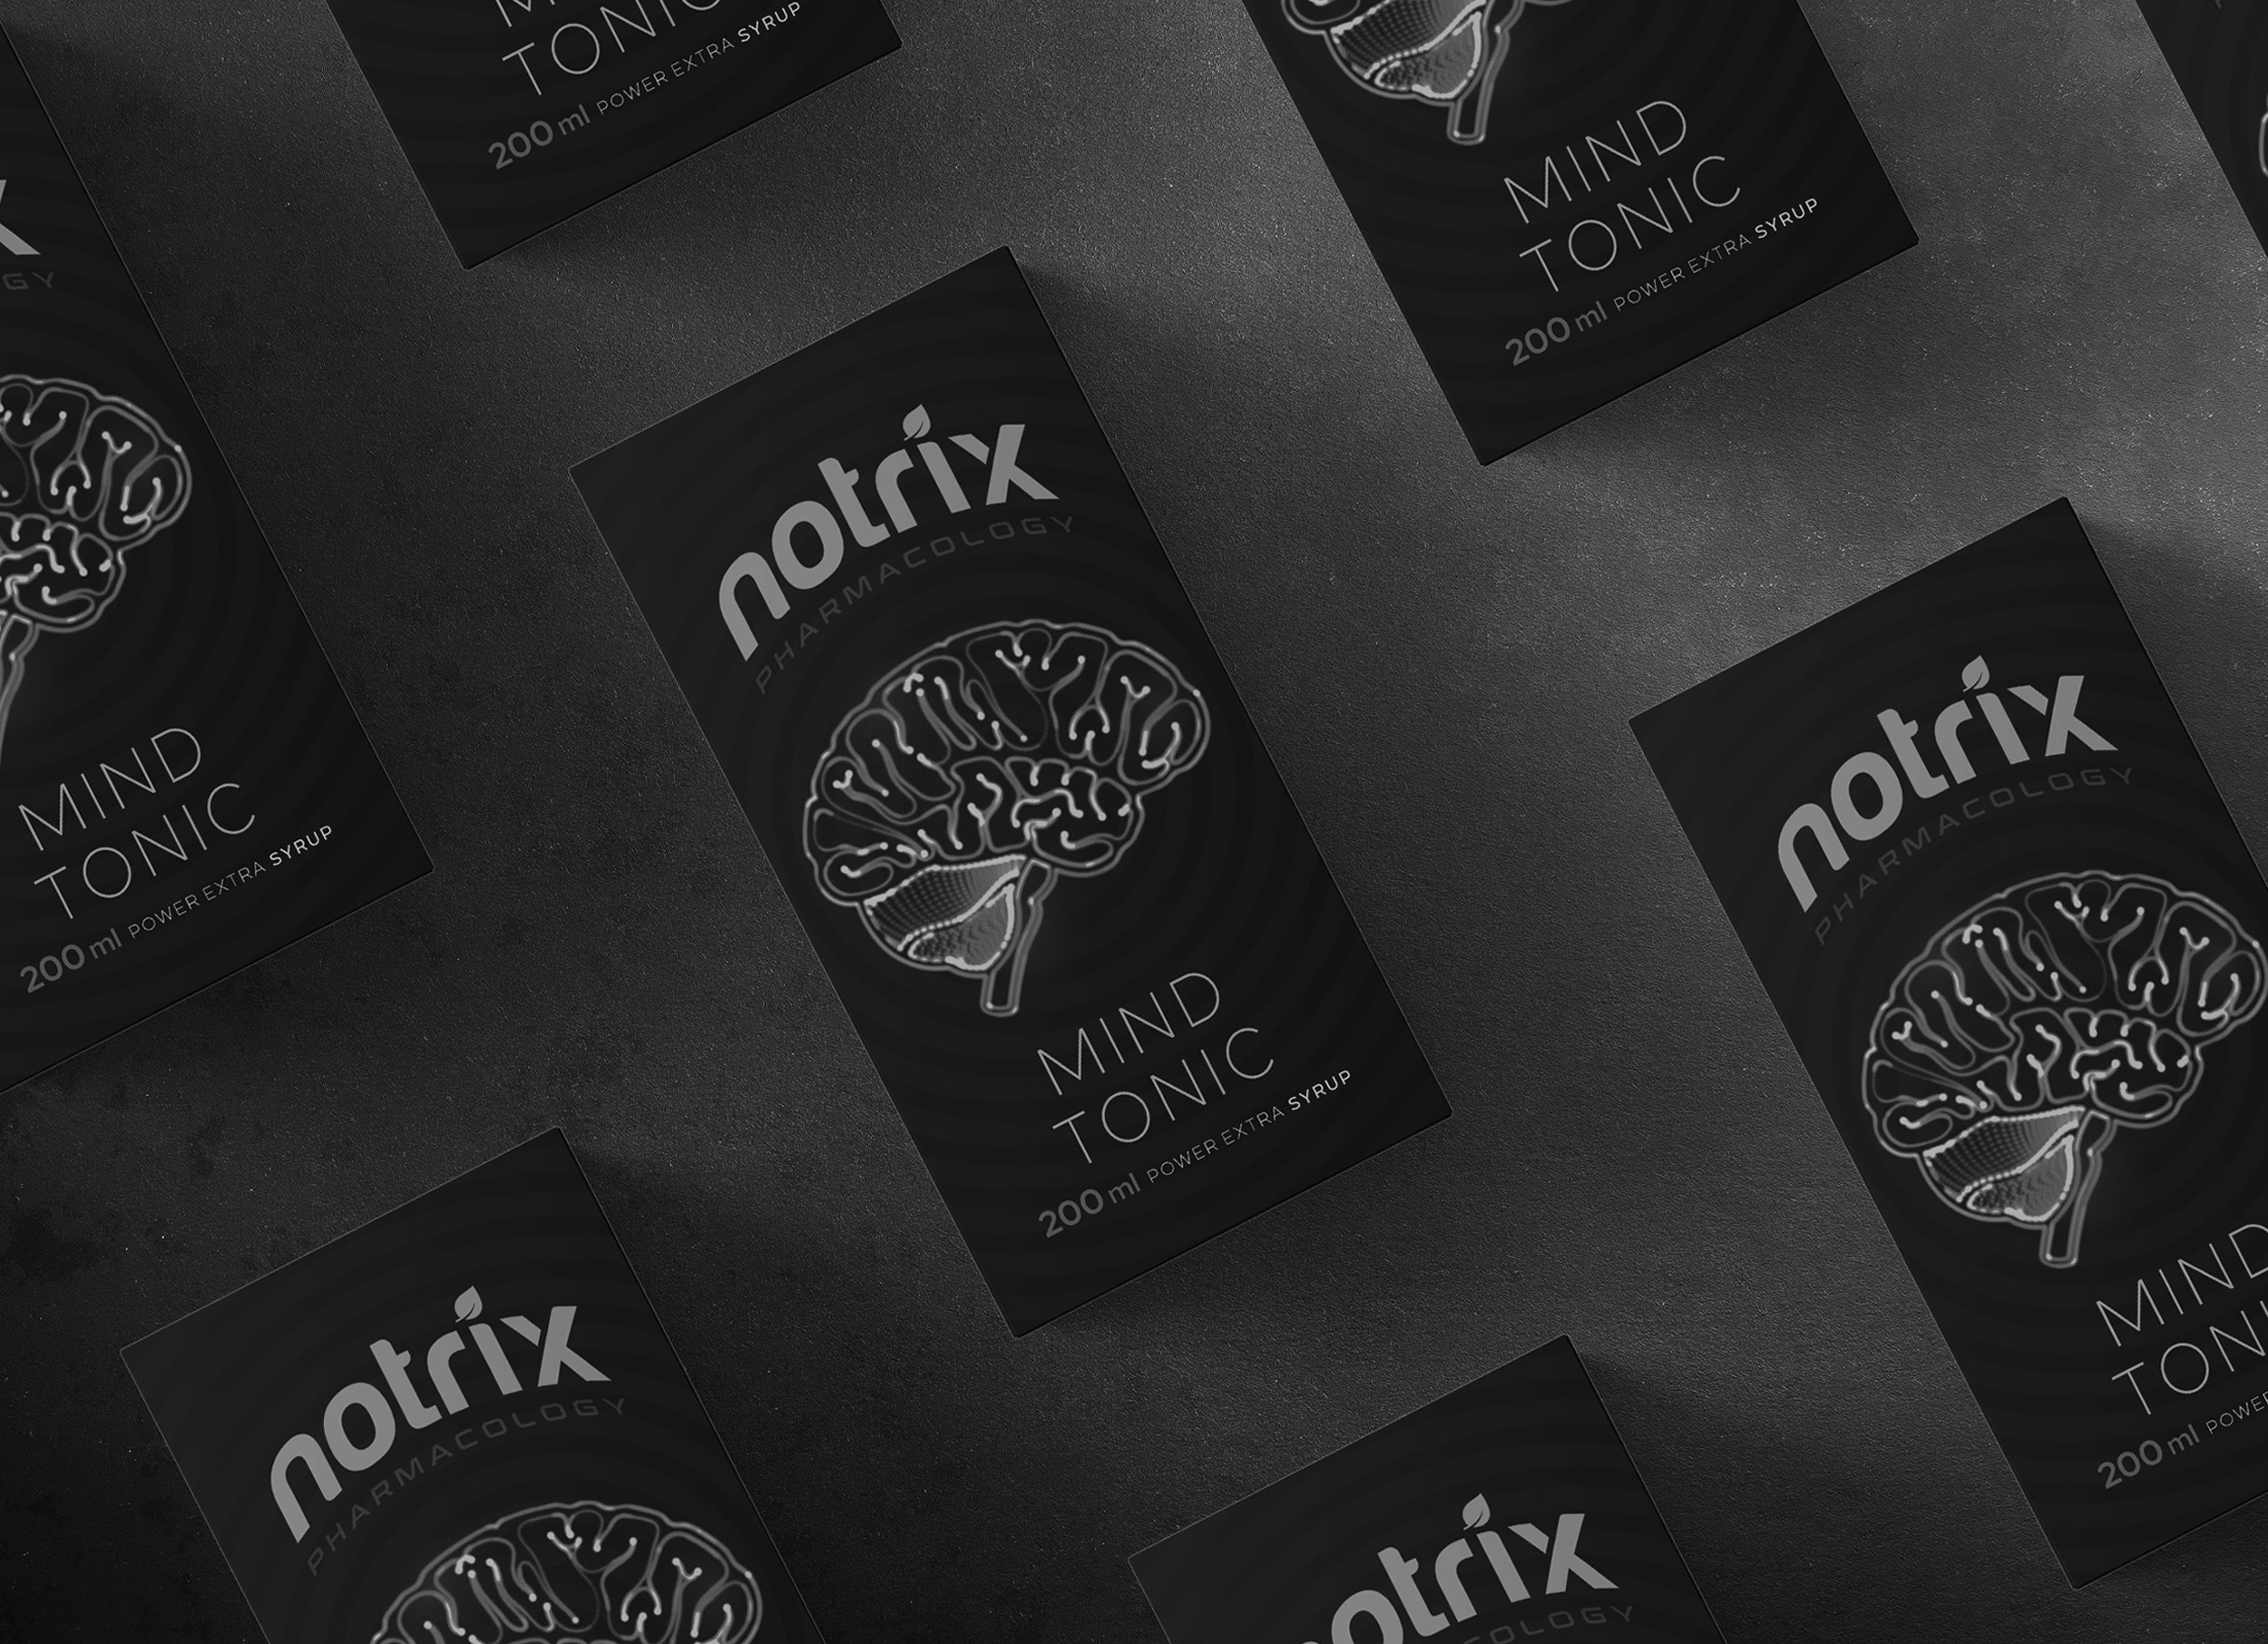 Notrix Pharmacology Packaging